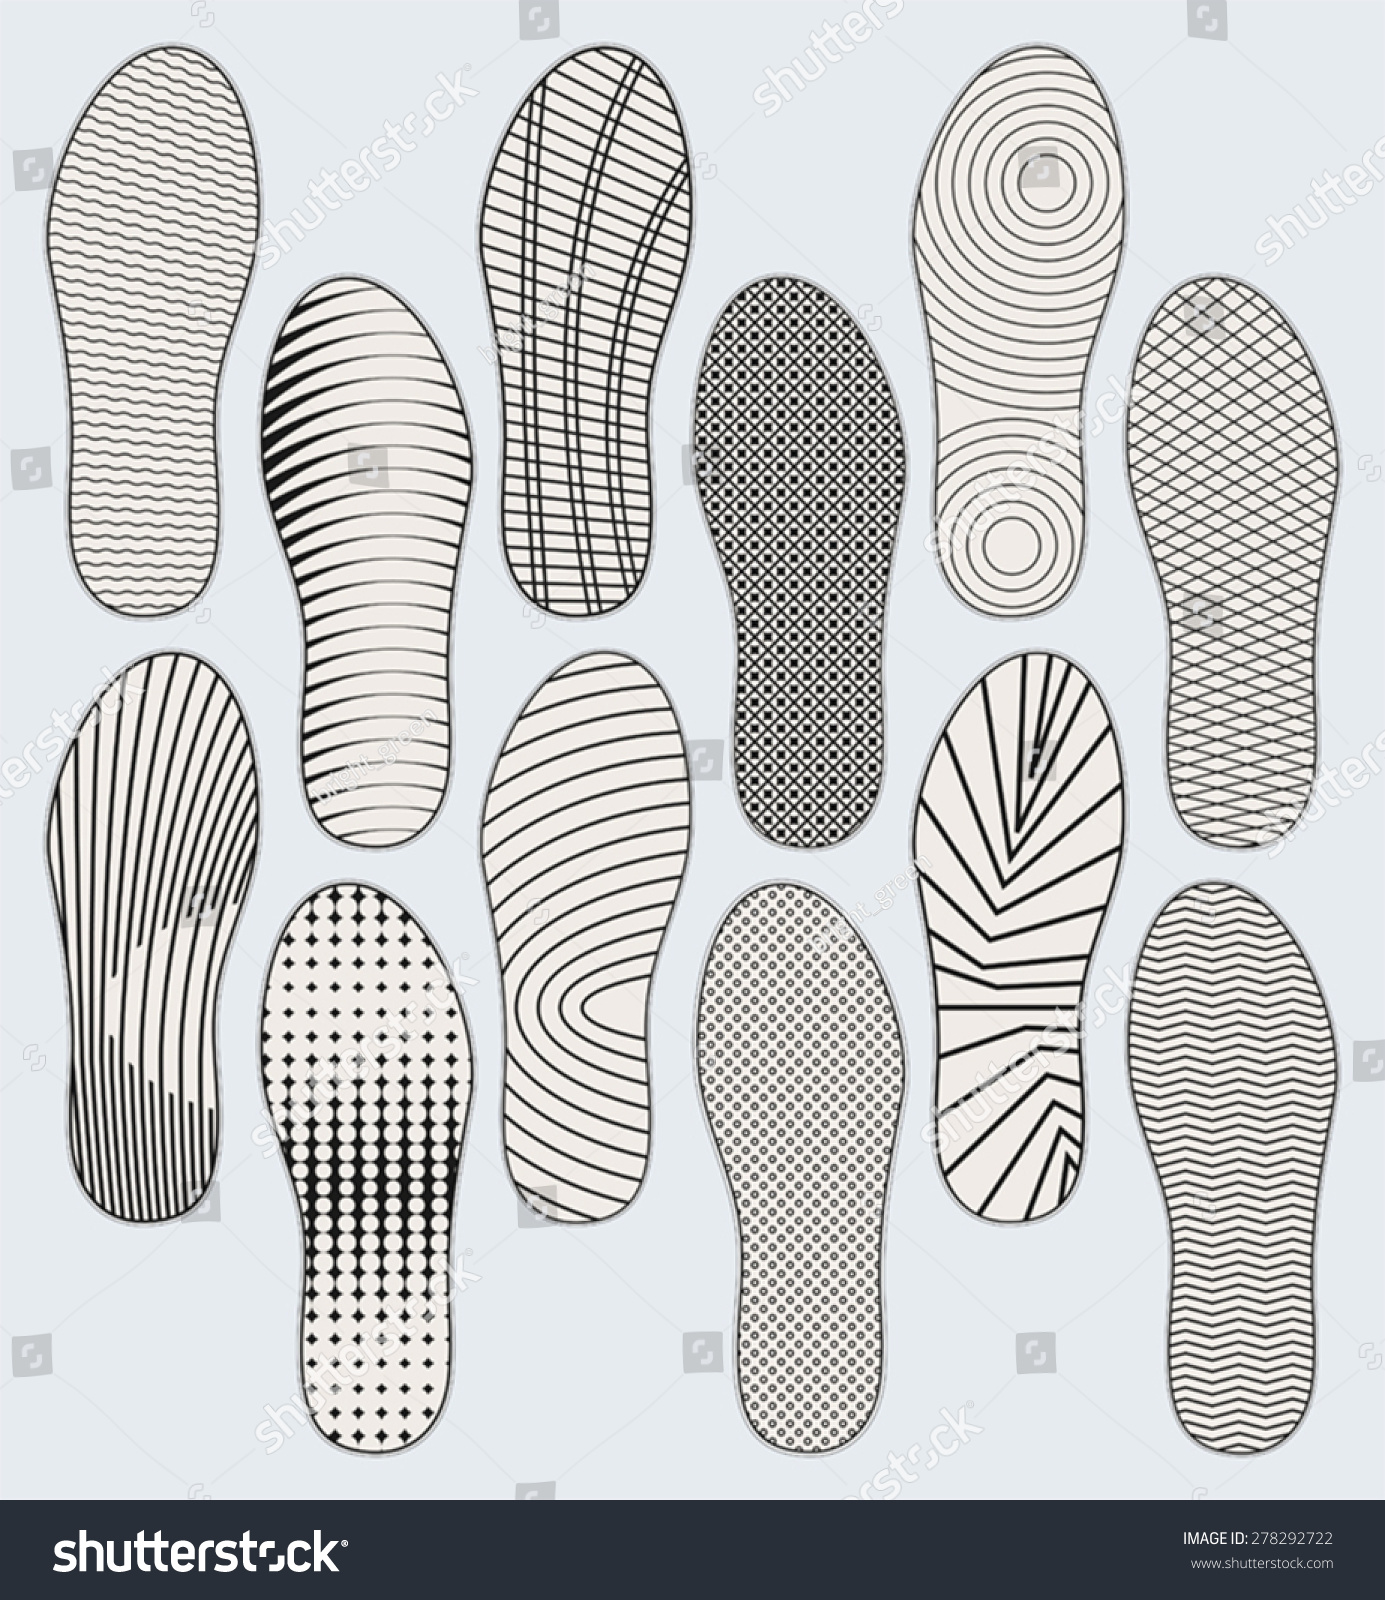 Several Variants Vector Patterns Shoe Soles Stock Vector (Royalty Free ...